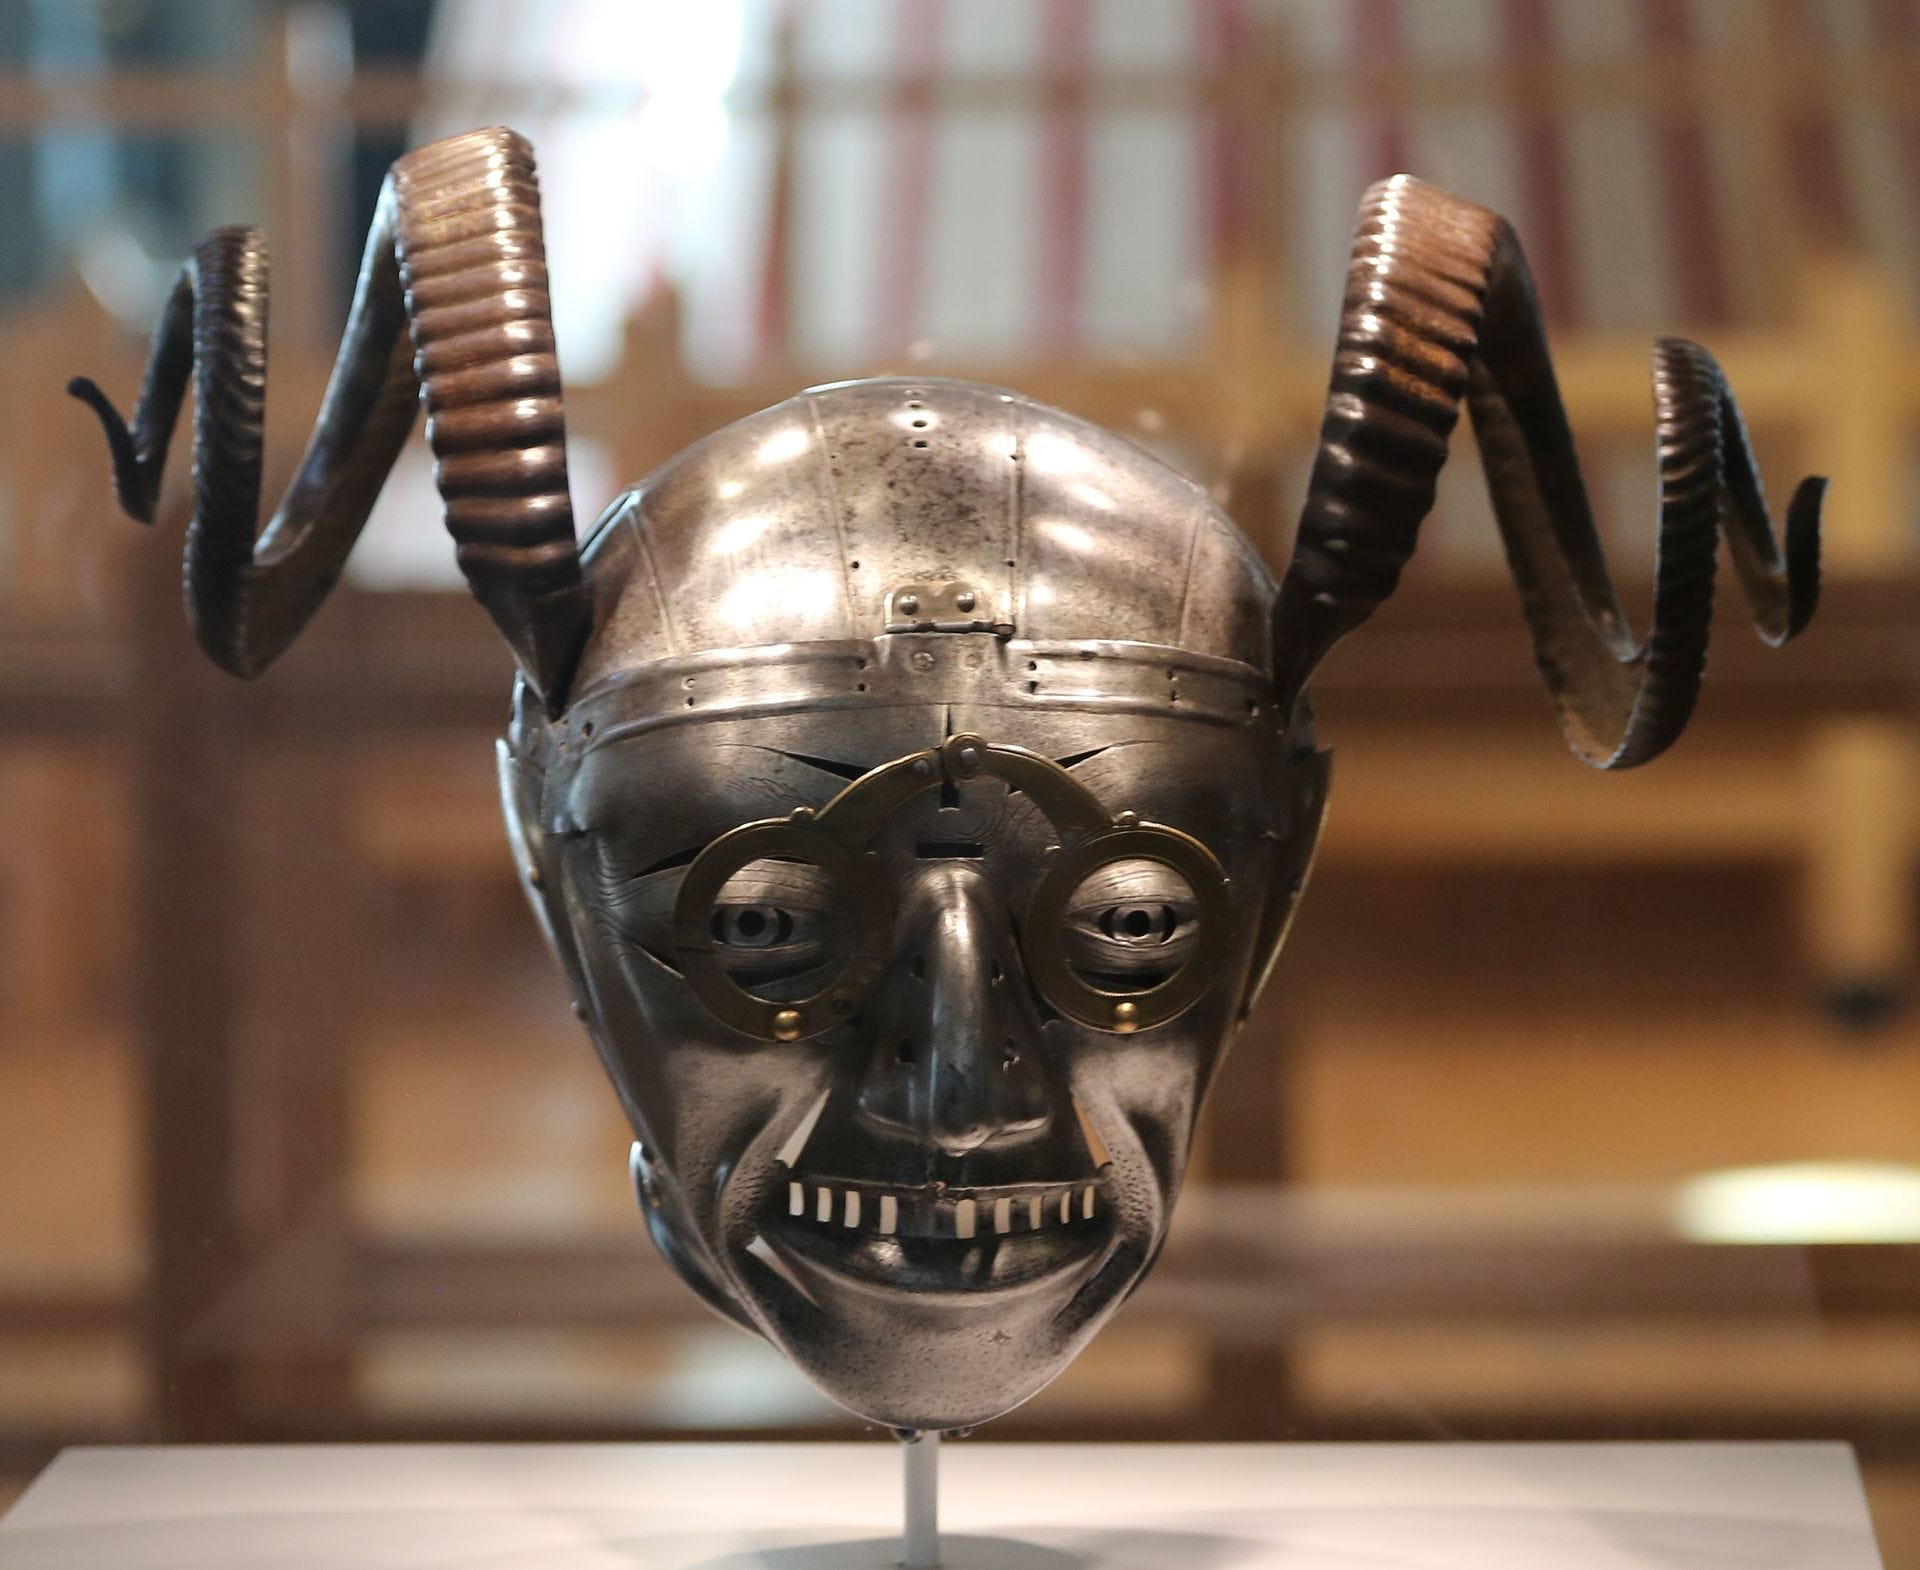 HISTORY, ETC: THE DIDN'T WEAR HORNED HELMETS. SO WHO DID?